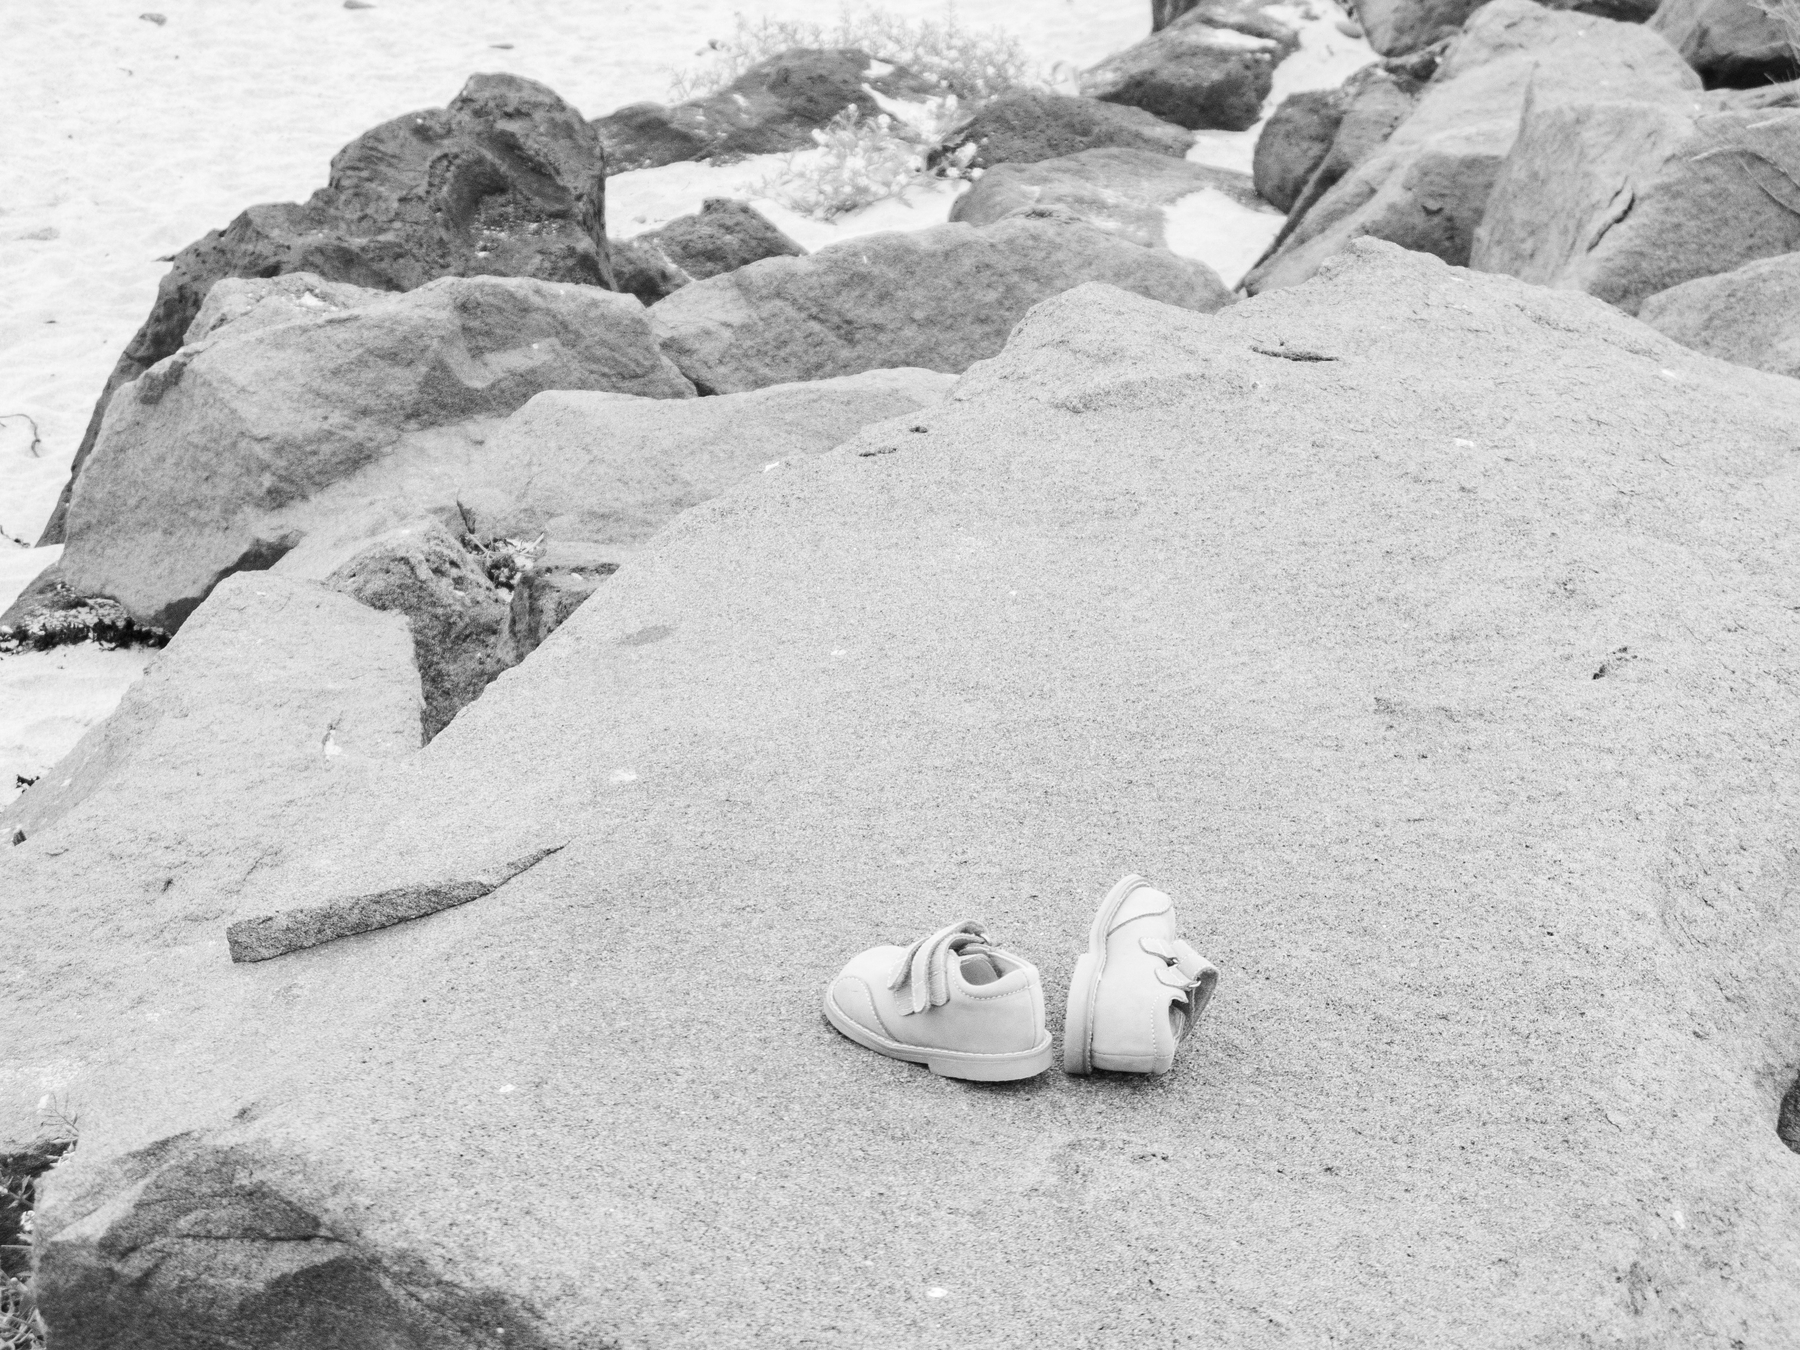 Somebody had taken their shoes off and left them on the rocks.